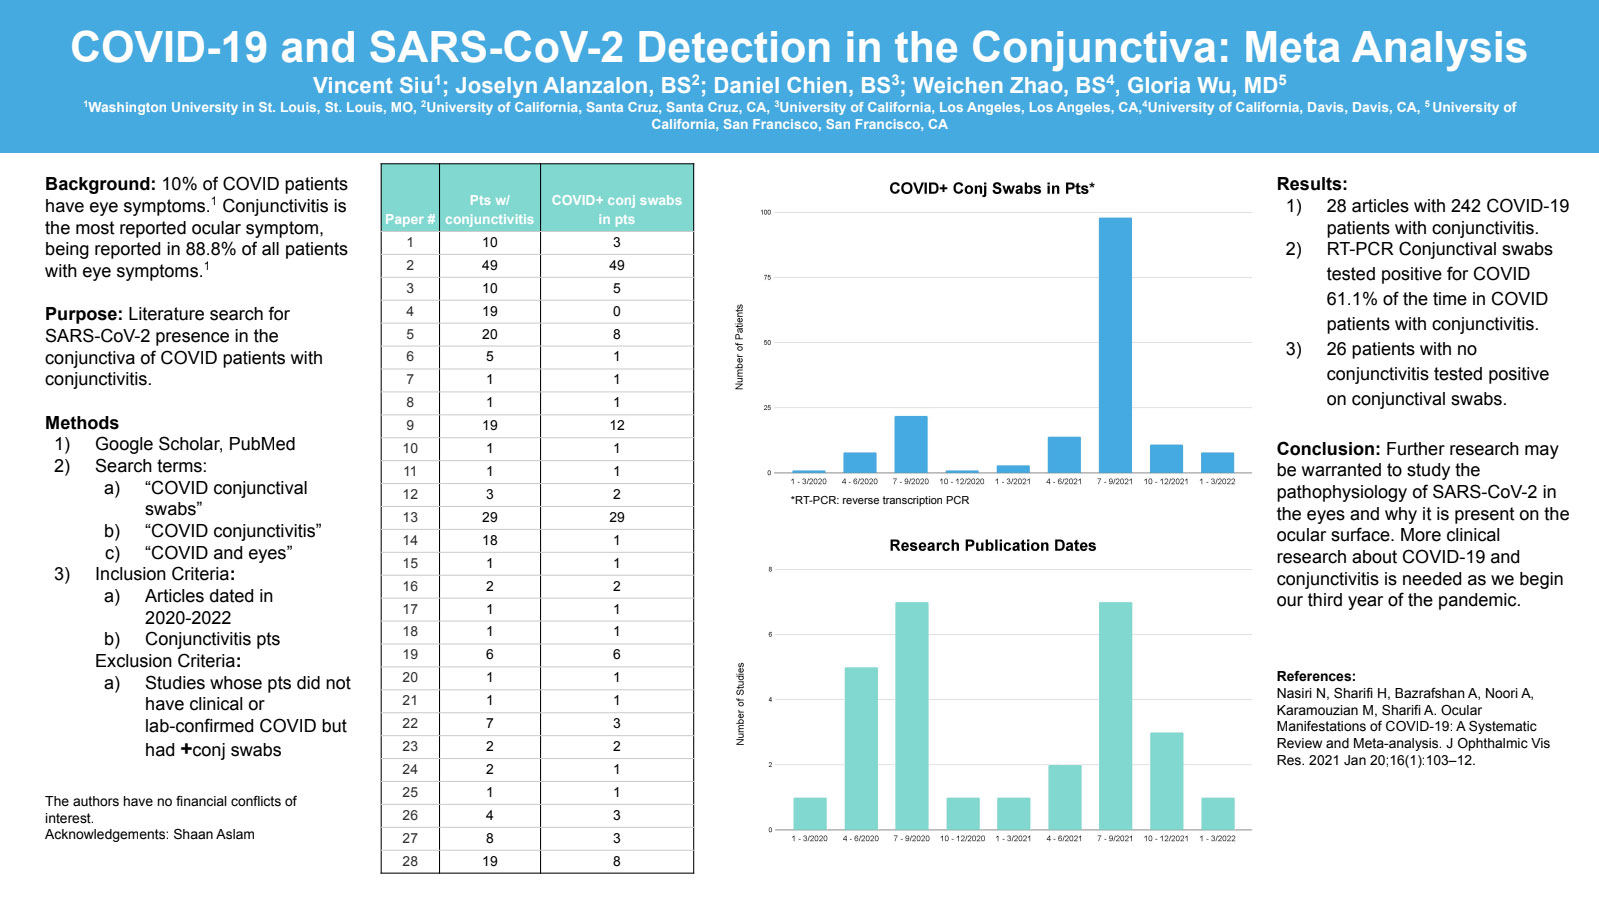 Covid-19 and SARS-CoV-2 Detection in the Conjunctiva" Meta Analysis